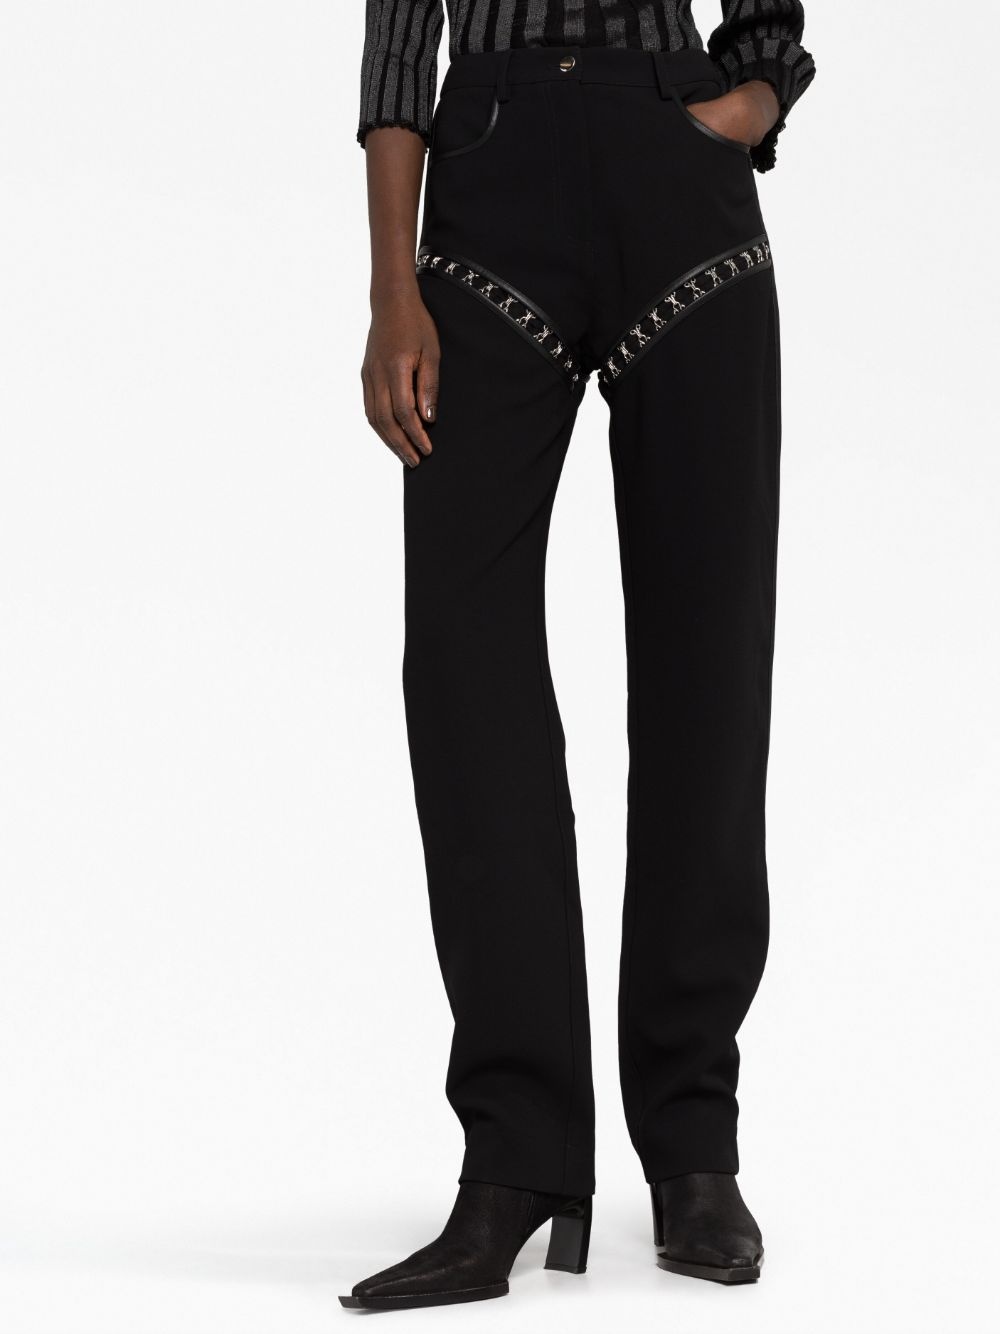 hook-detailing cut-out trousers - 5